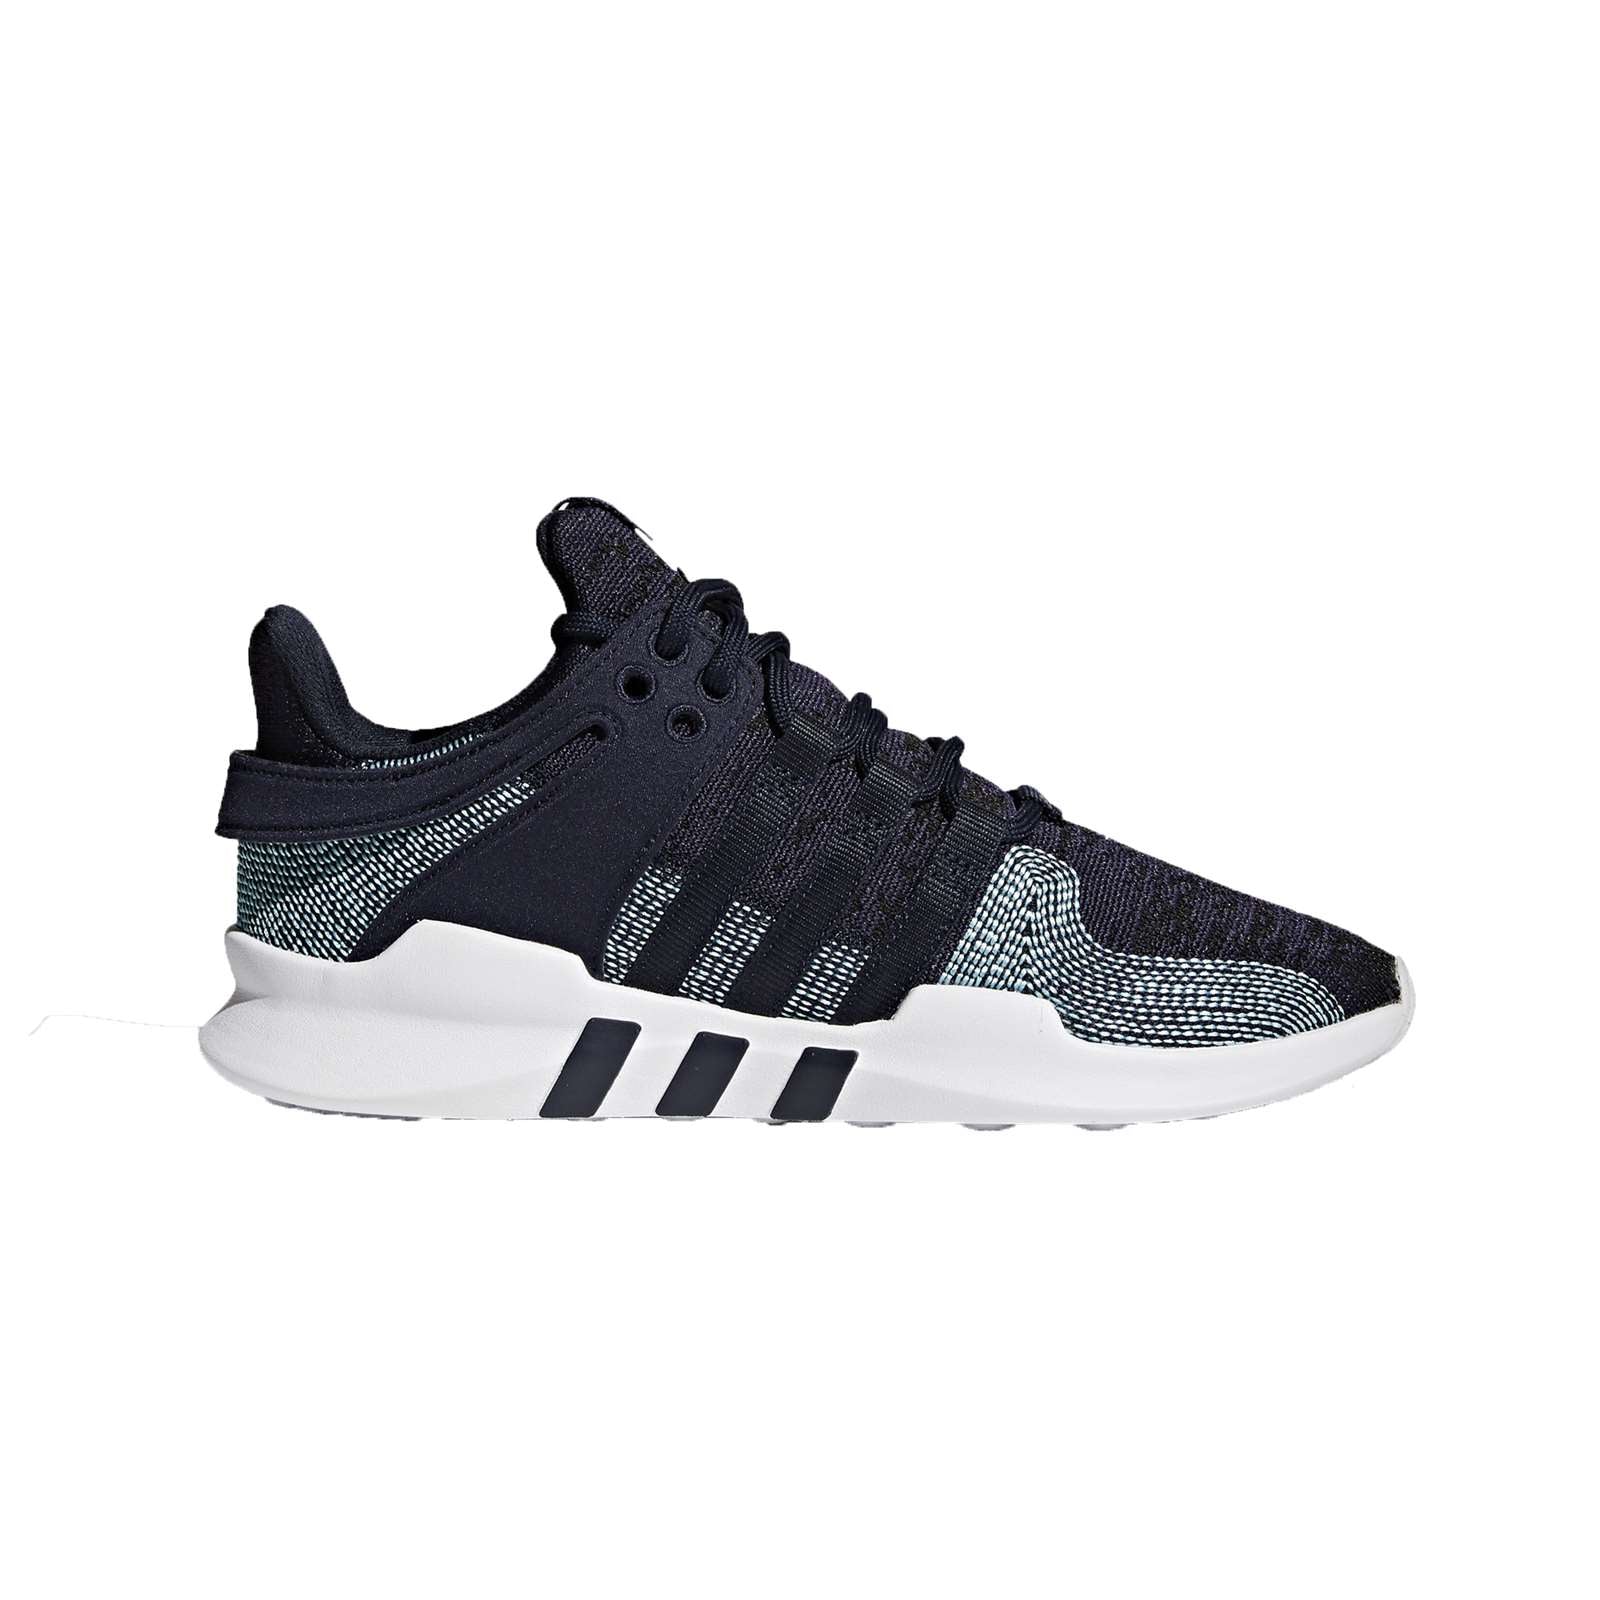 Adidas Men Eqt Support Adv Ck Parley Running Shoes